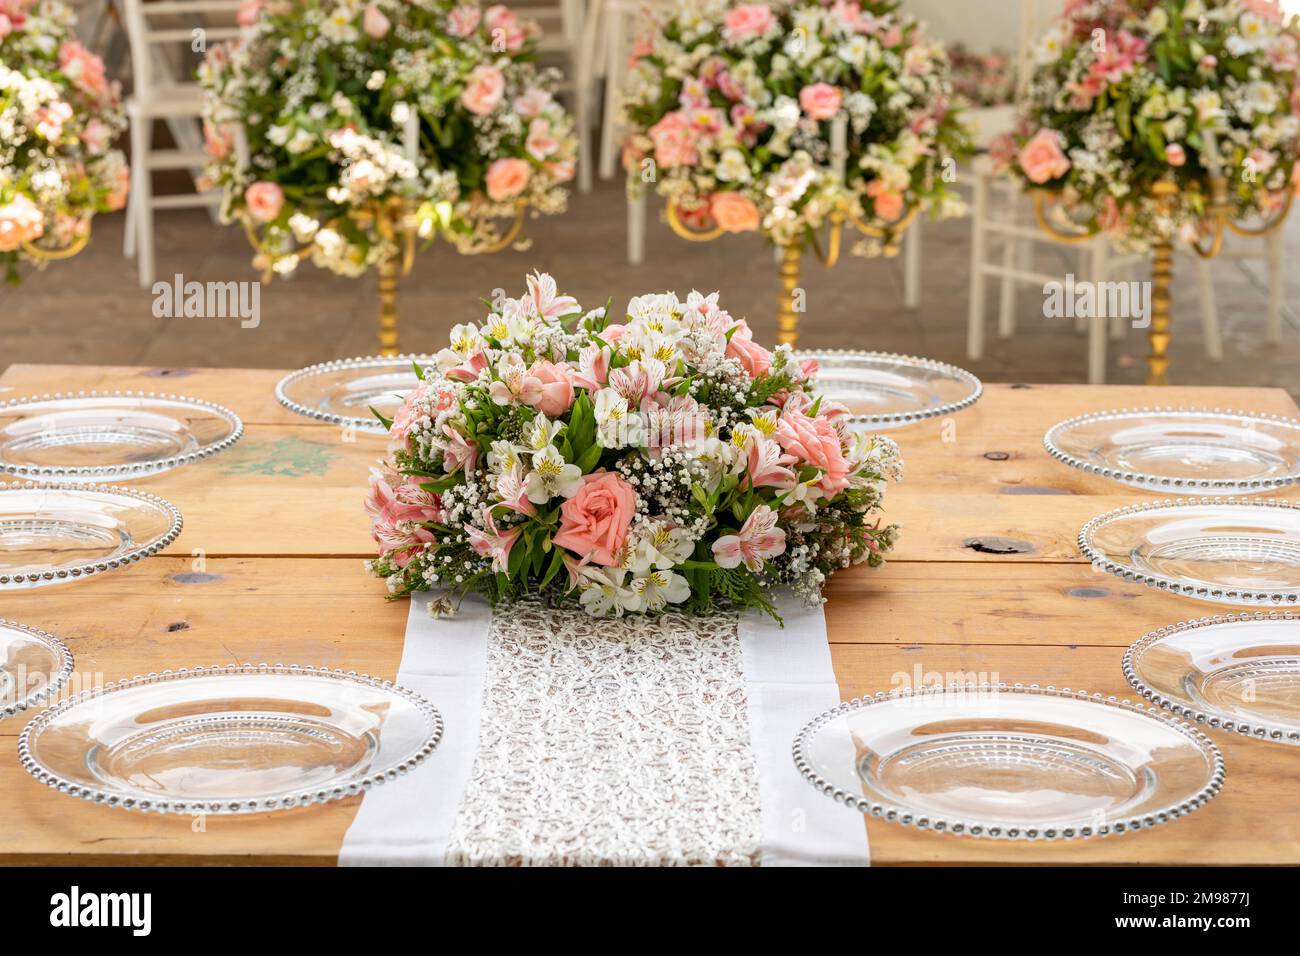 Social event table with glassware and a bouquet of flowers in the centre. Stock Photo